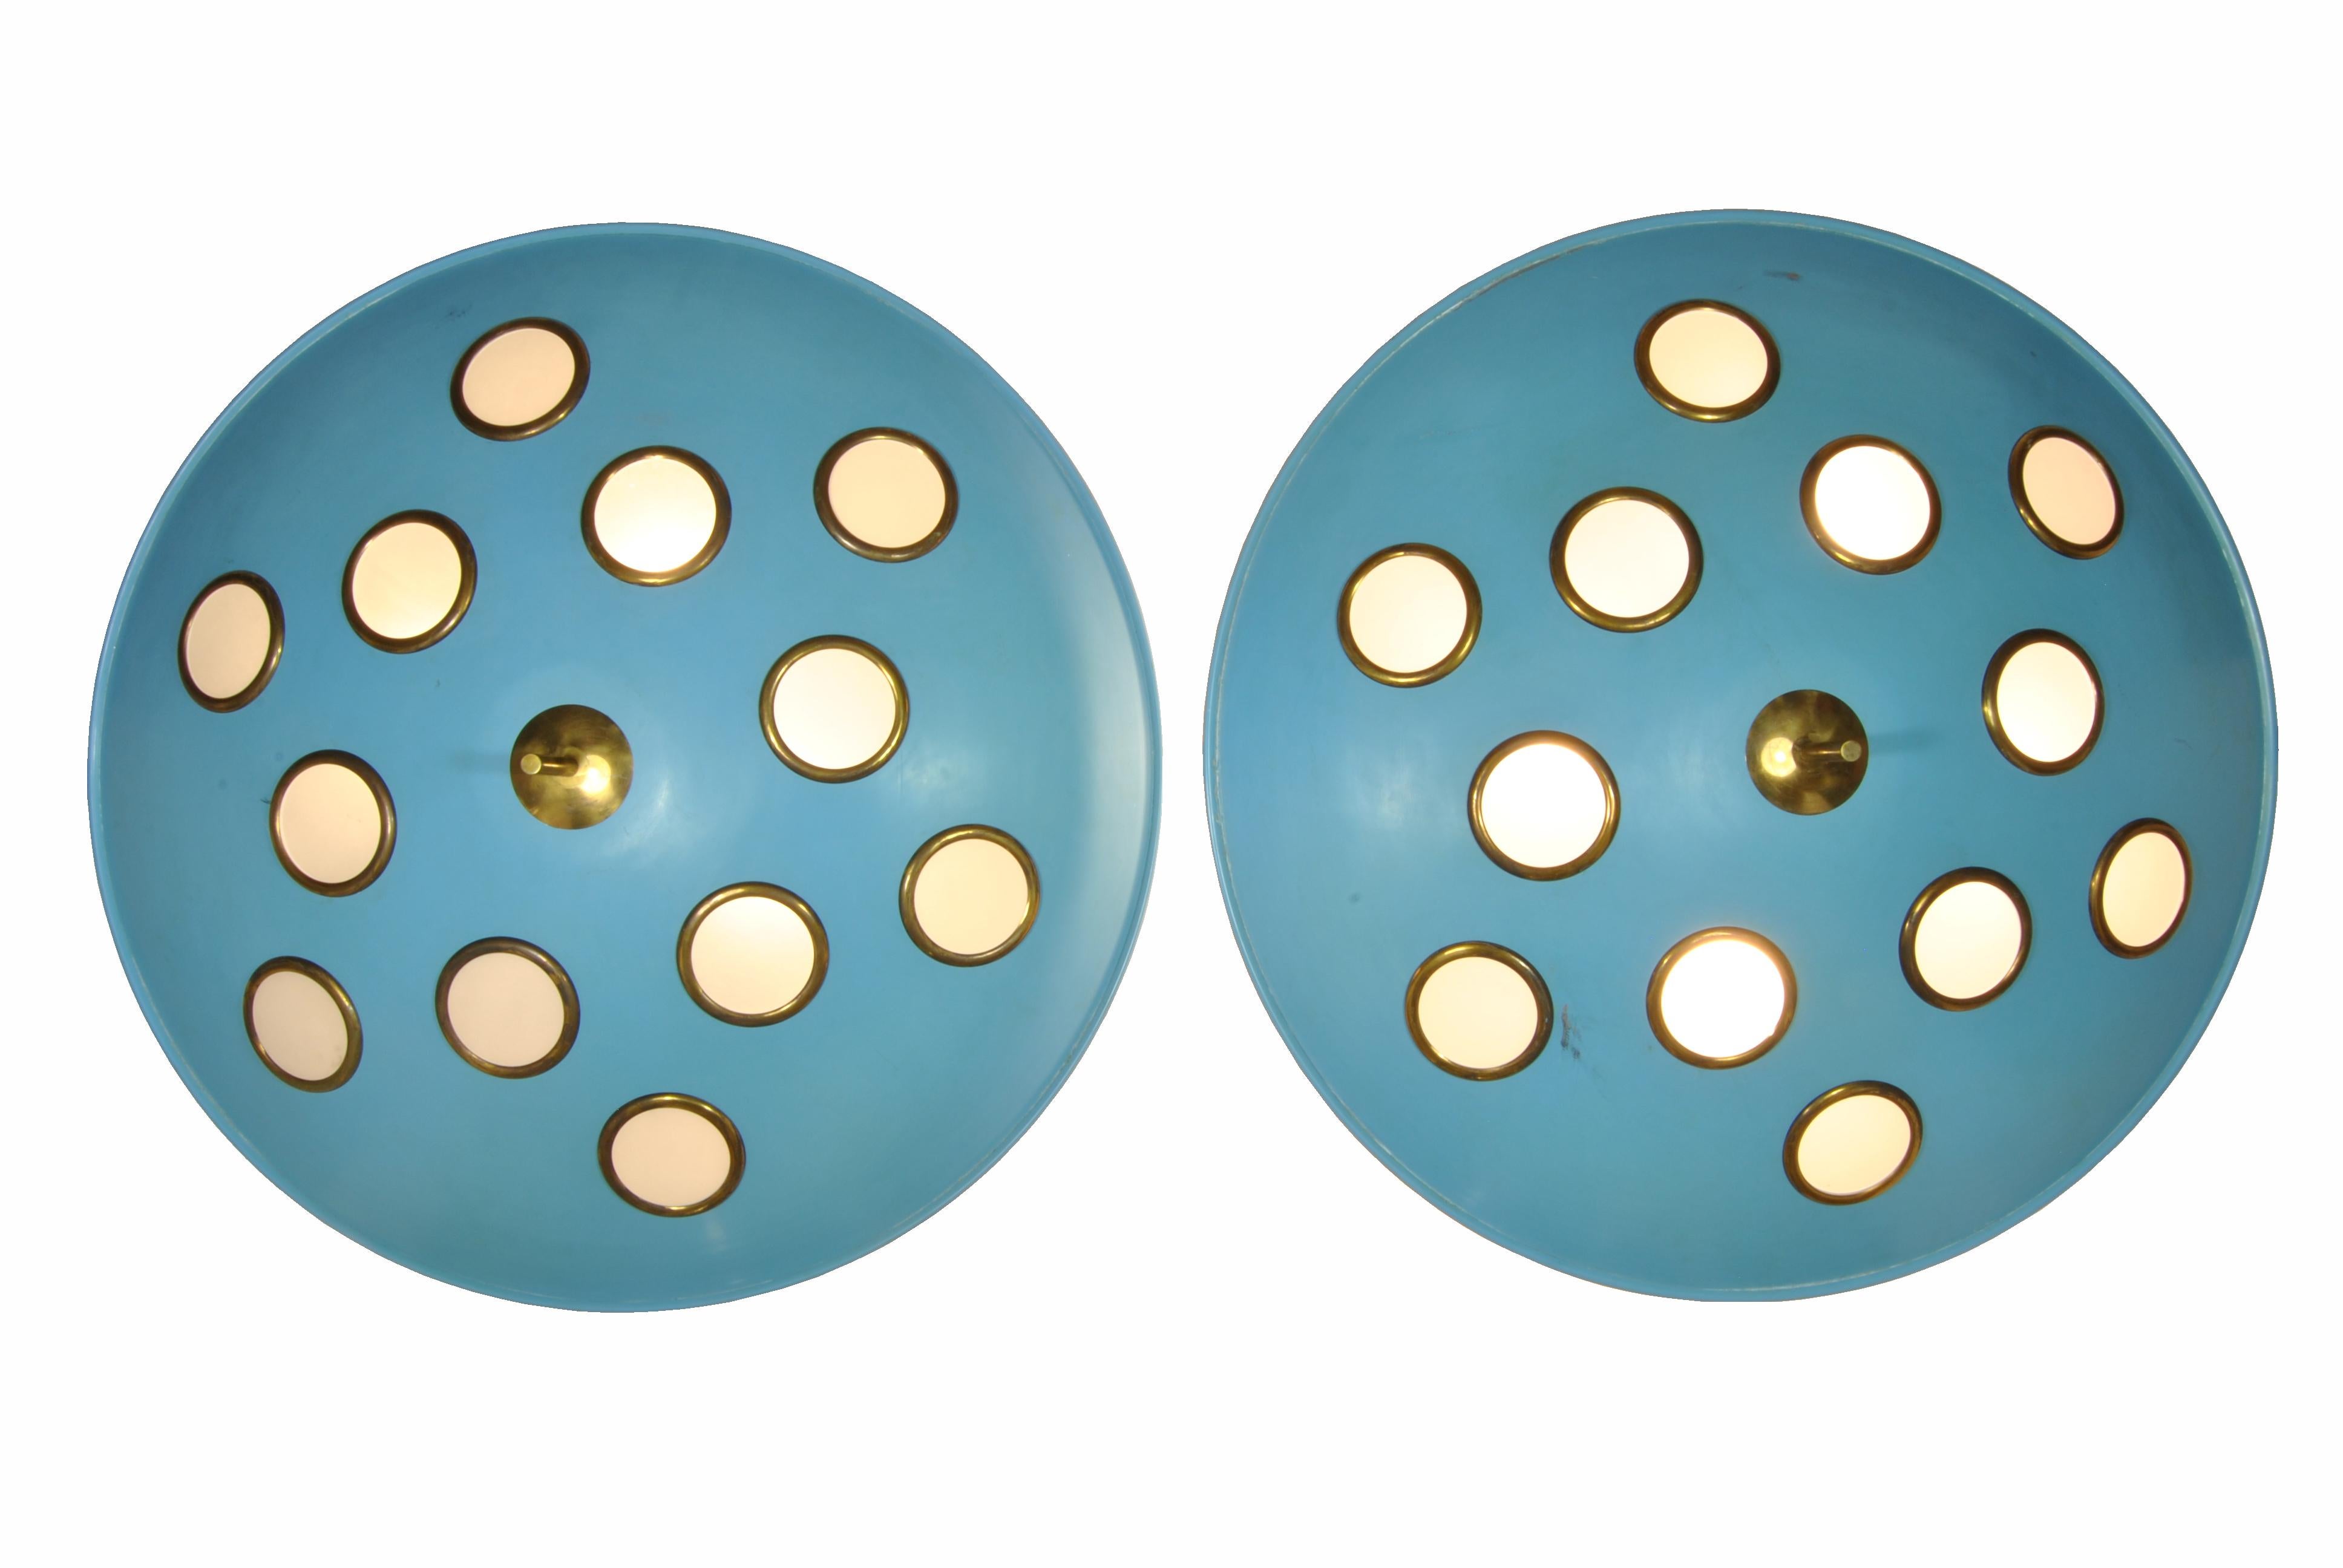 Exceptional pair of blue metal lamps with brass details and diffuser elements in sandblasted glass, produced by Lumen, Italy, 1960.
Bibliography:
- Original catalog Lumen Italia.